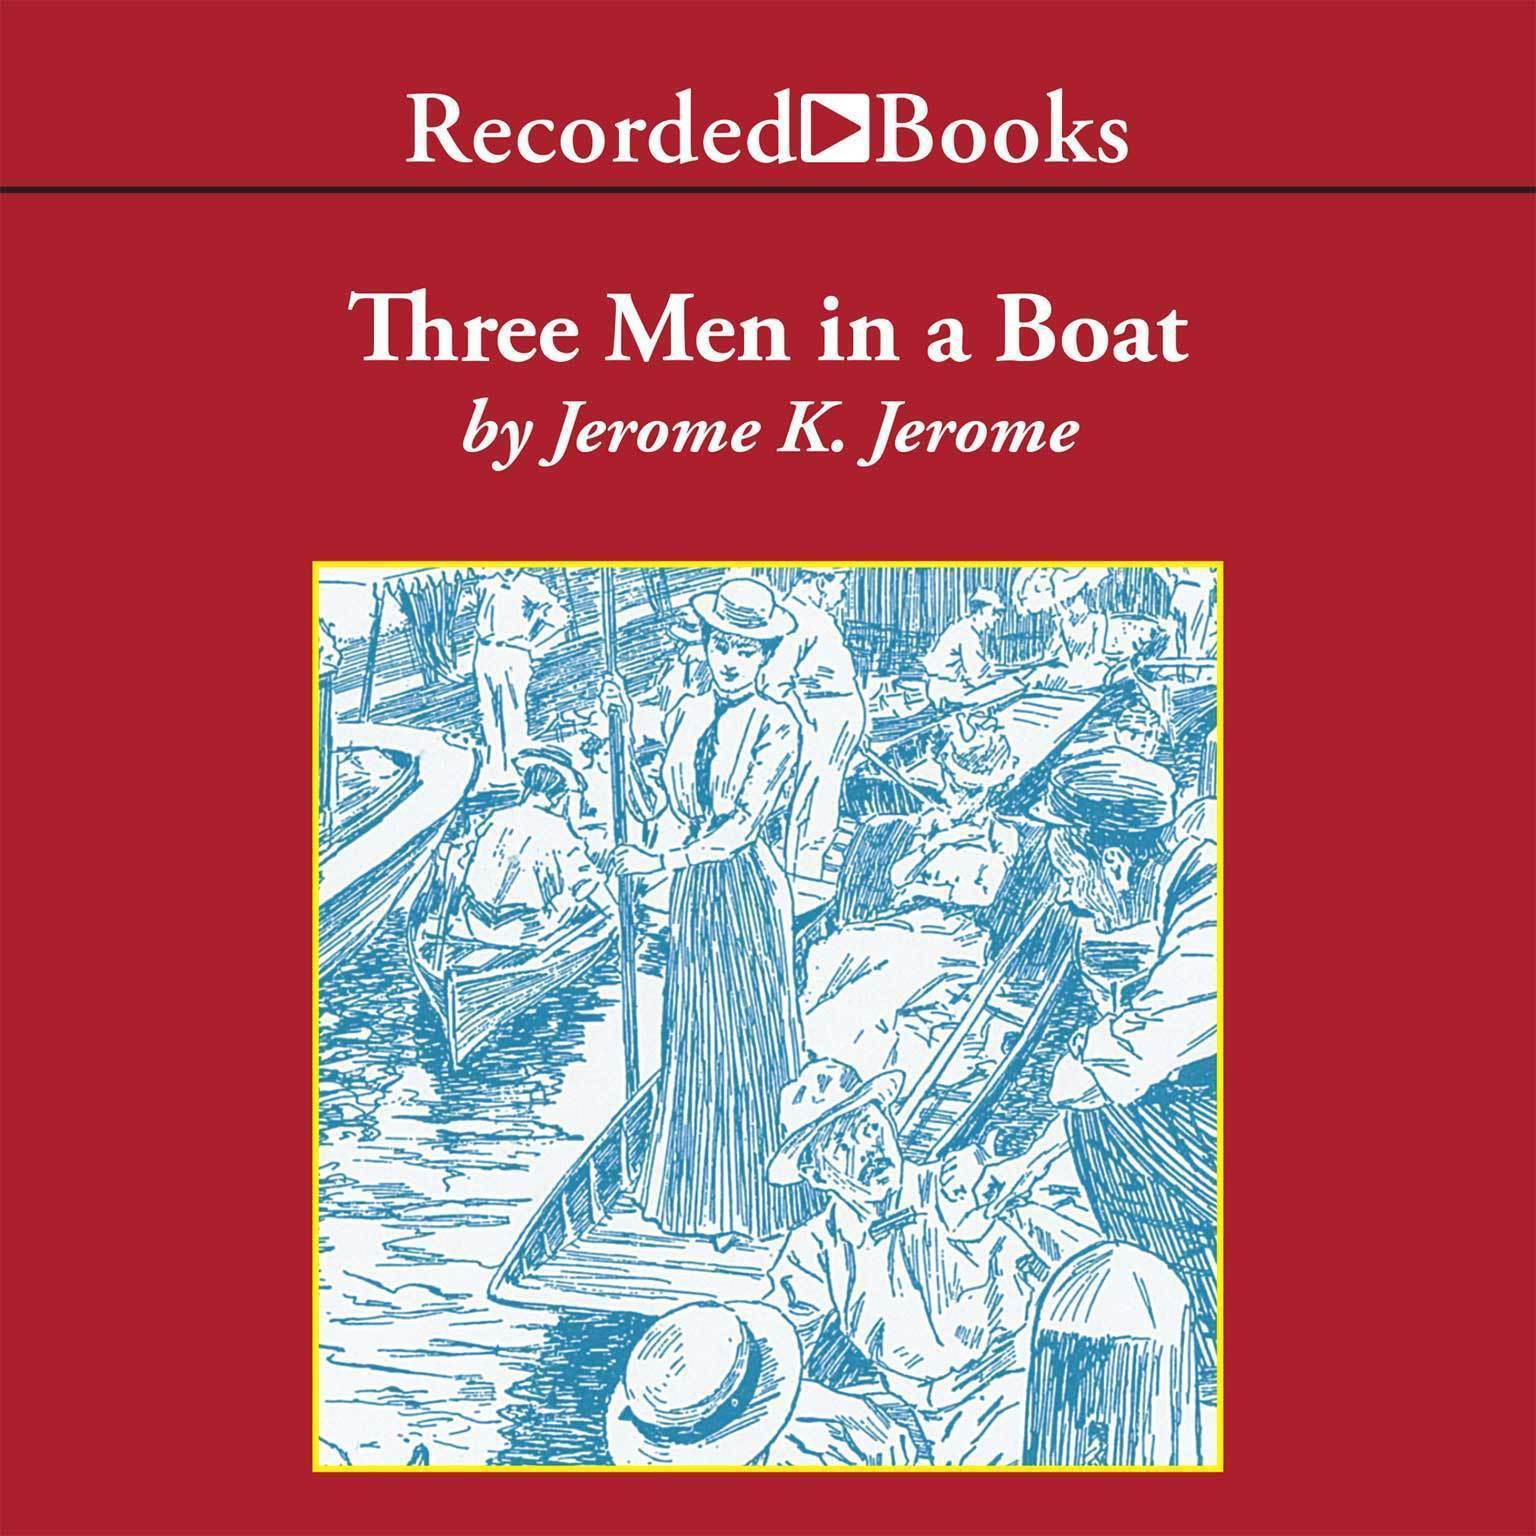 Three Men in a Boat Audiobook, by Jerome K. Jerome